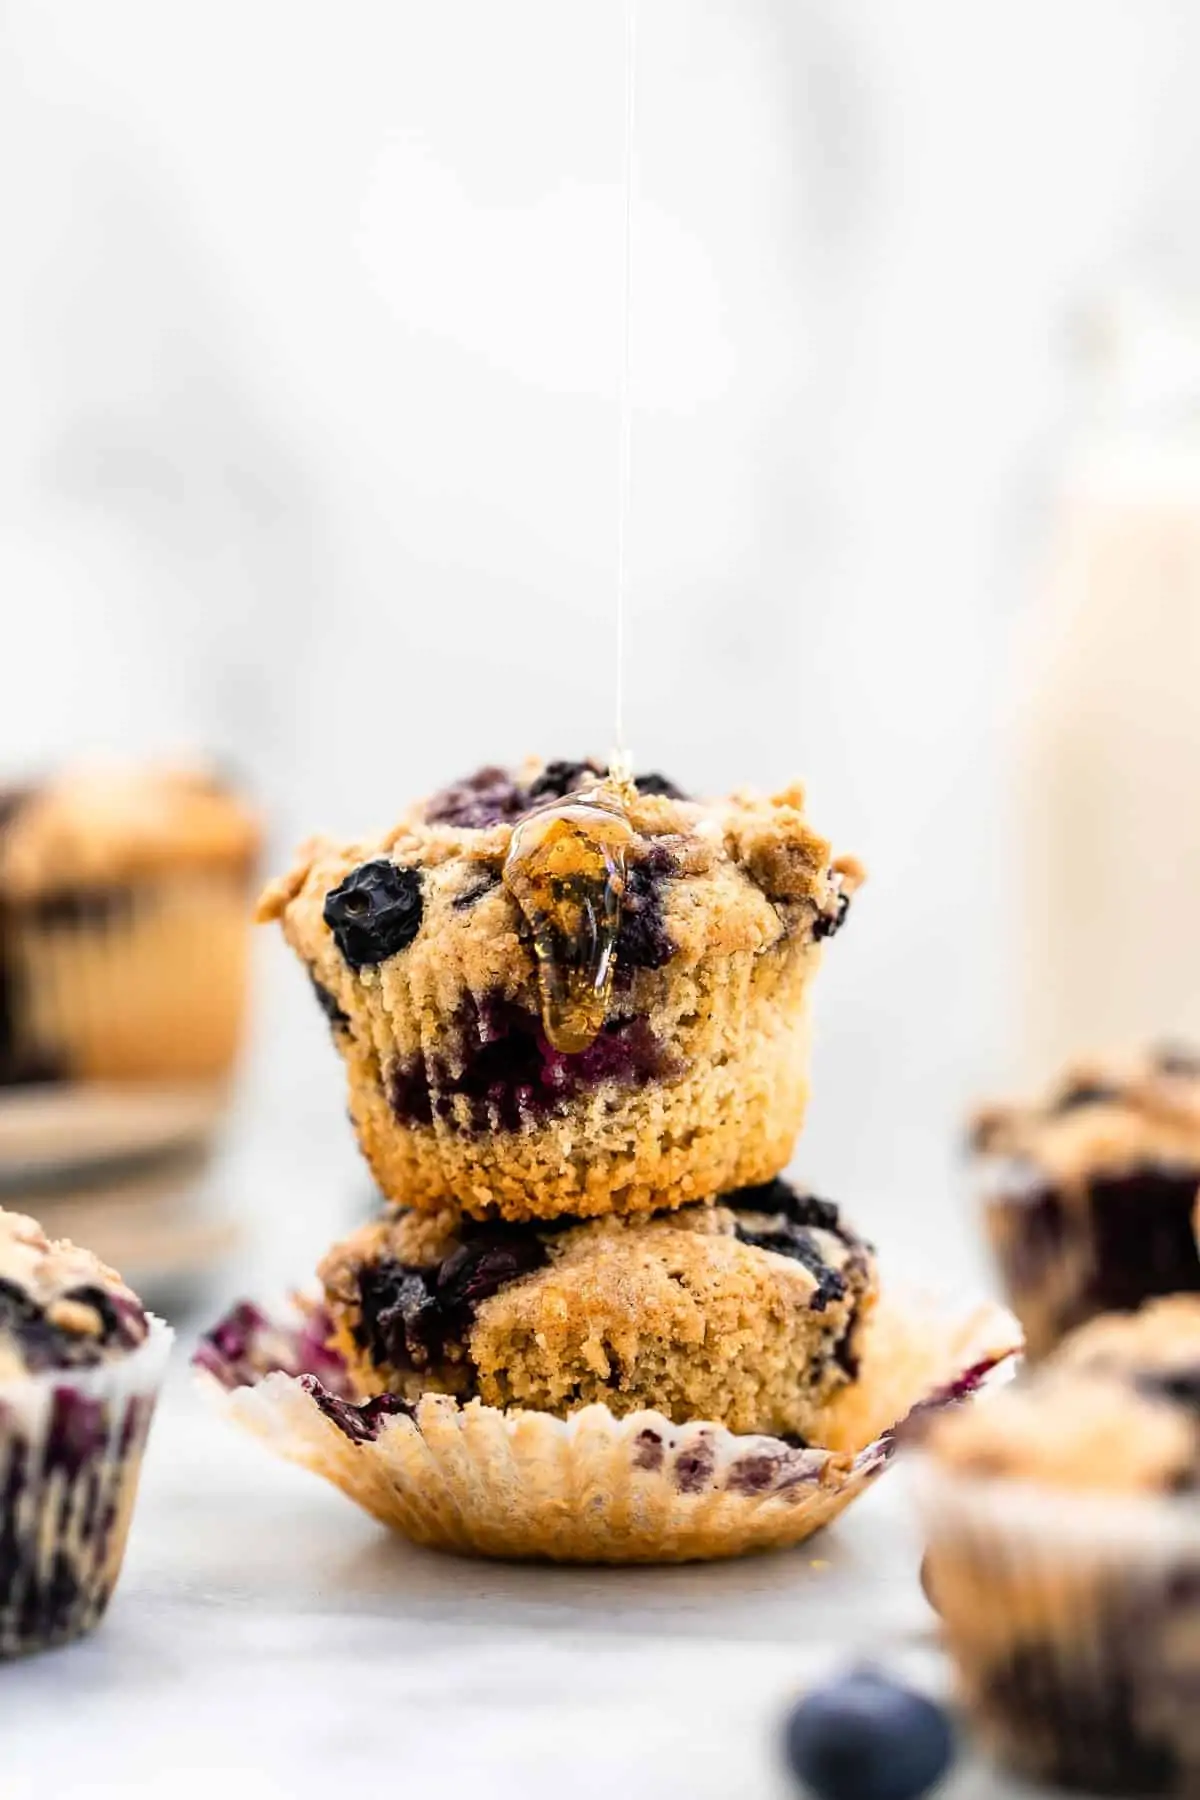 Honey dripping down a blueberry muffin. 